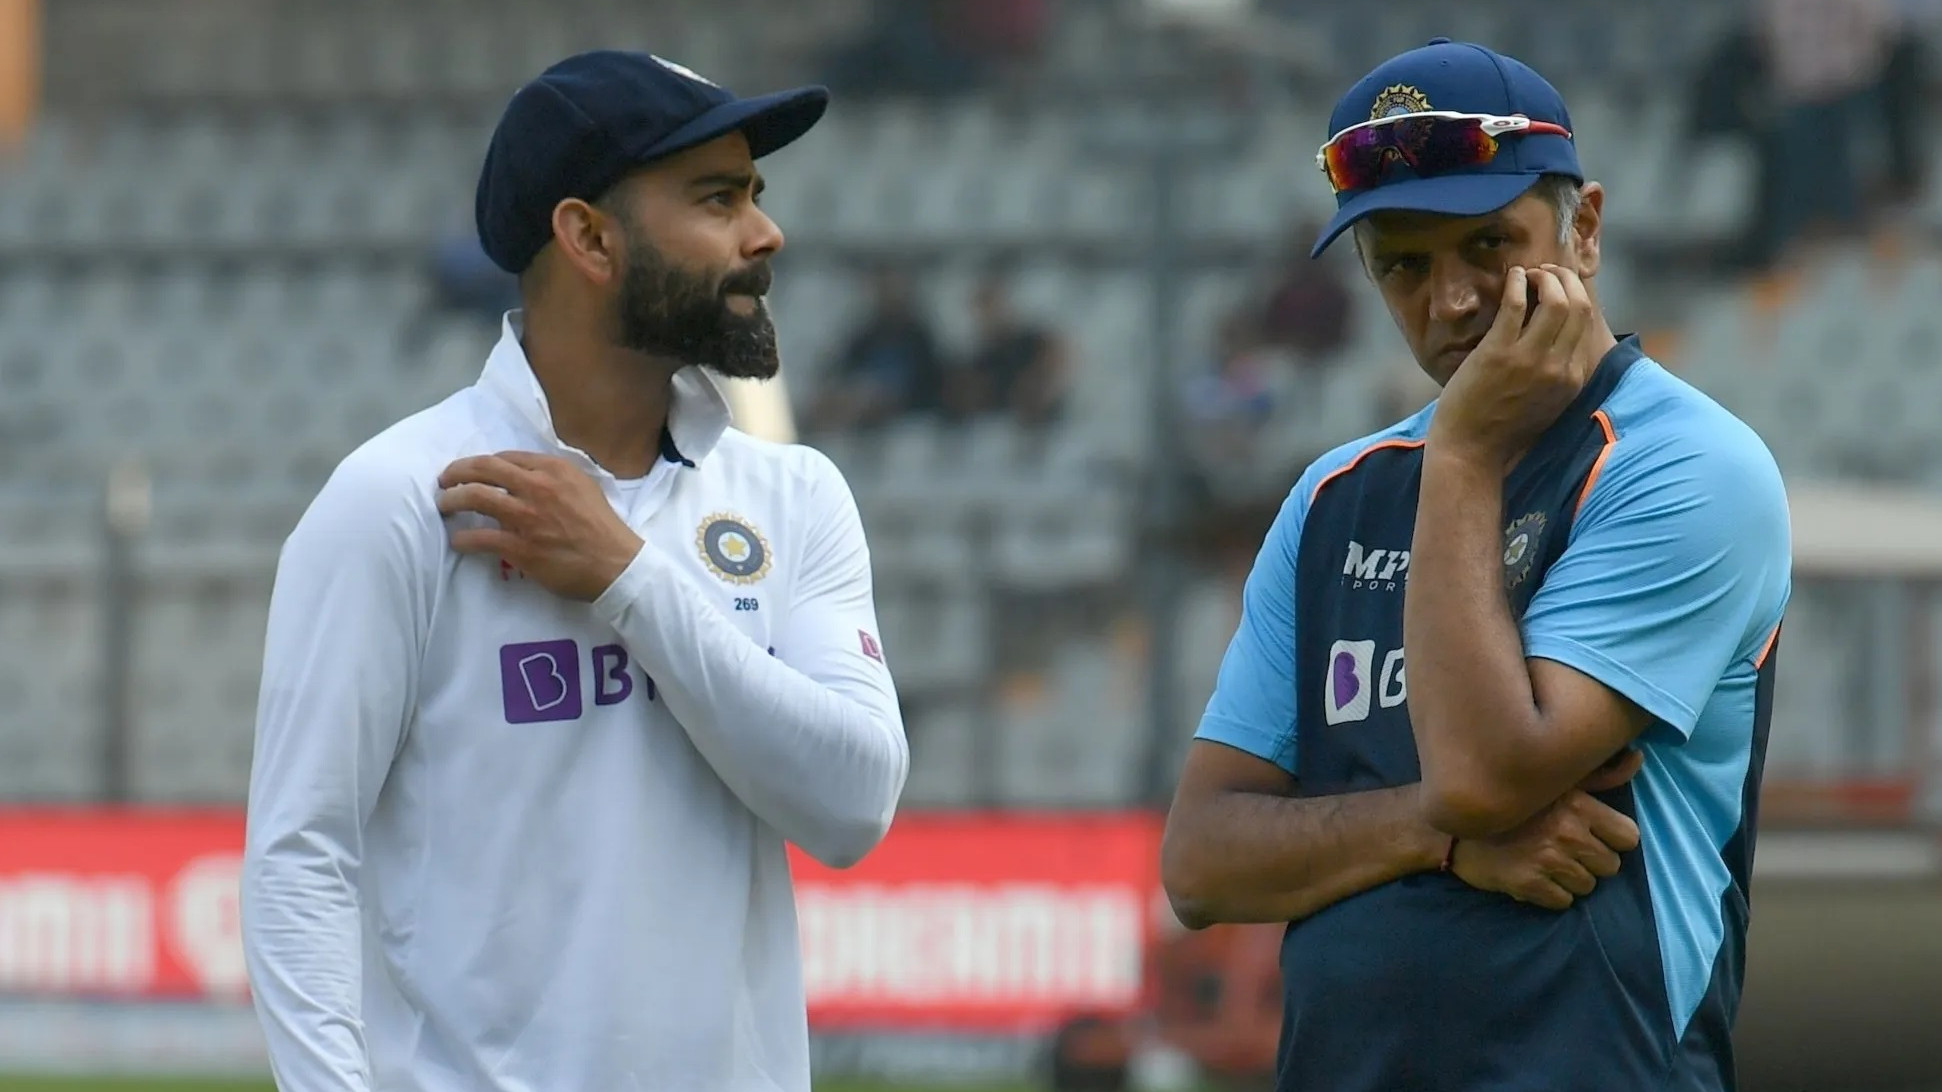 SA v IND 2021-22: I really feel there will be a big run of scores once he clicks in: Rahul Dravid on Virat Kohli